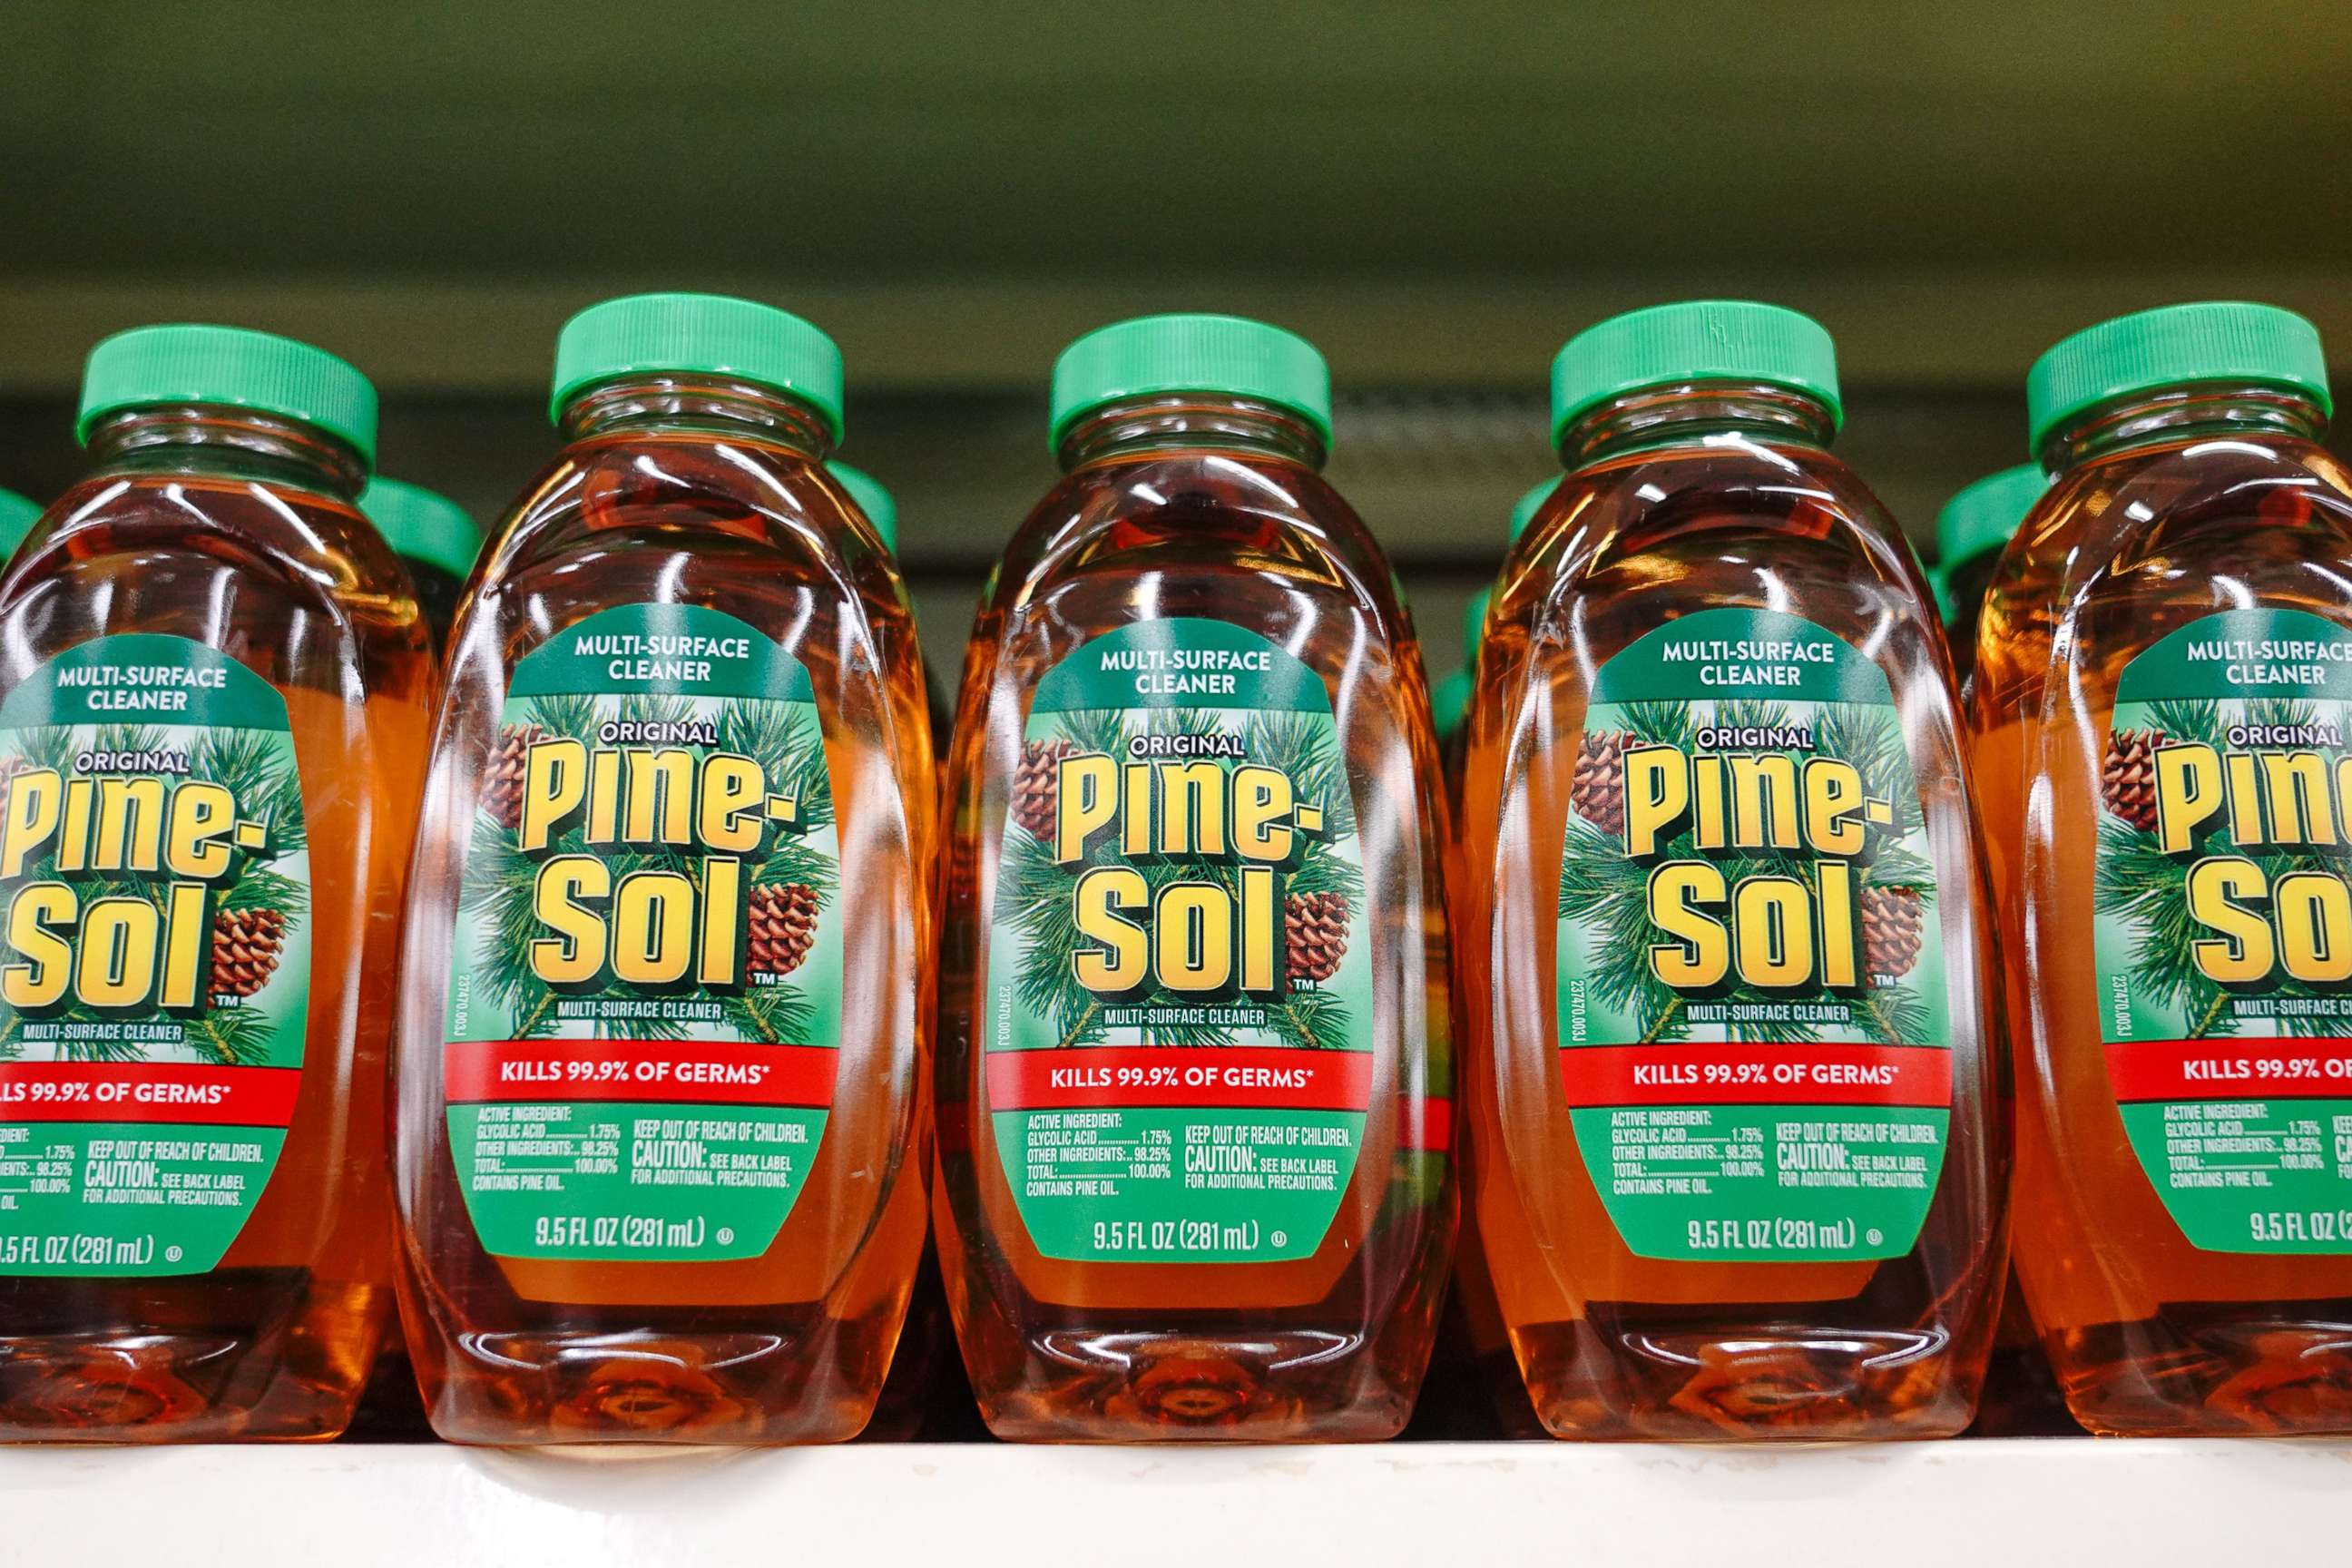 PHOTO: Pine-Sol Original Multi-Surface Cleaner which has just received an approval from the U.S. Environmental Protection Agency (EPA) to kill coronavirus on surfaces.